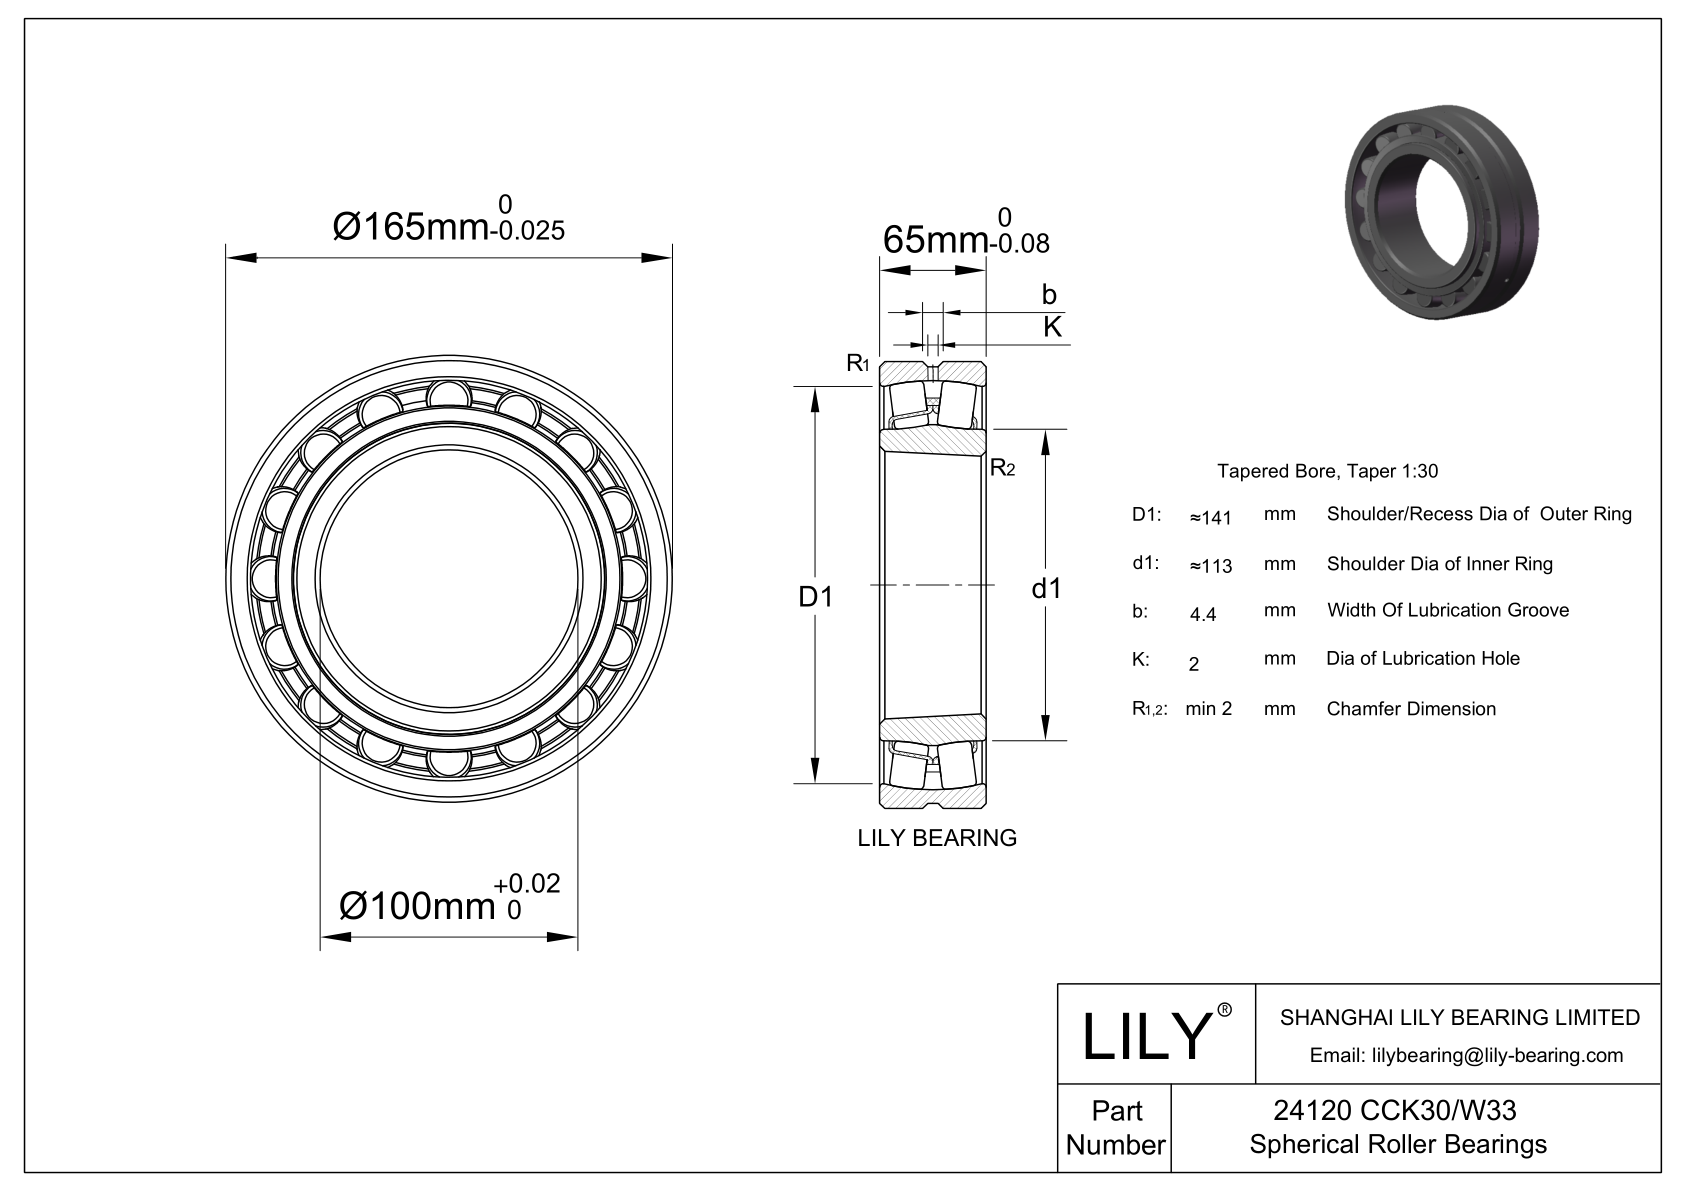 24120 CCK30/W33 Double Row Spherical Roller Bearing cad drawing